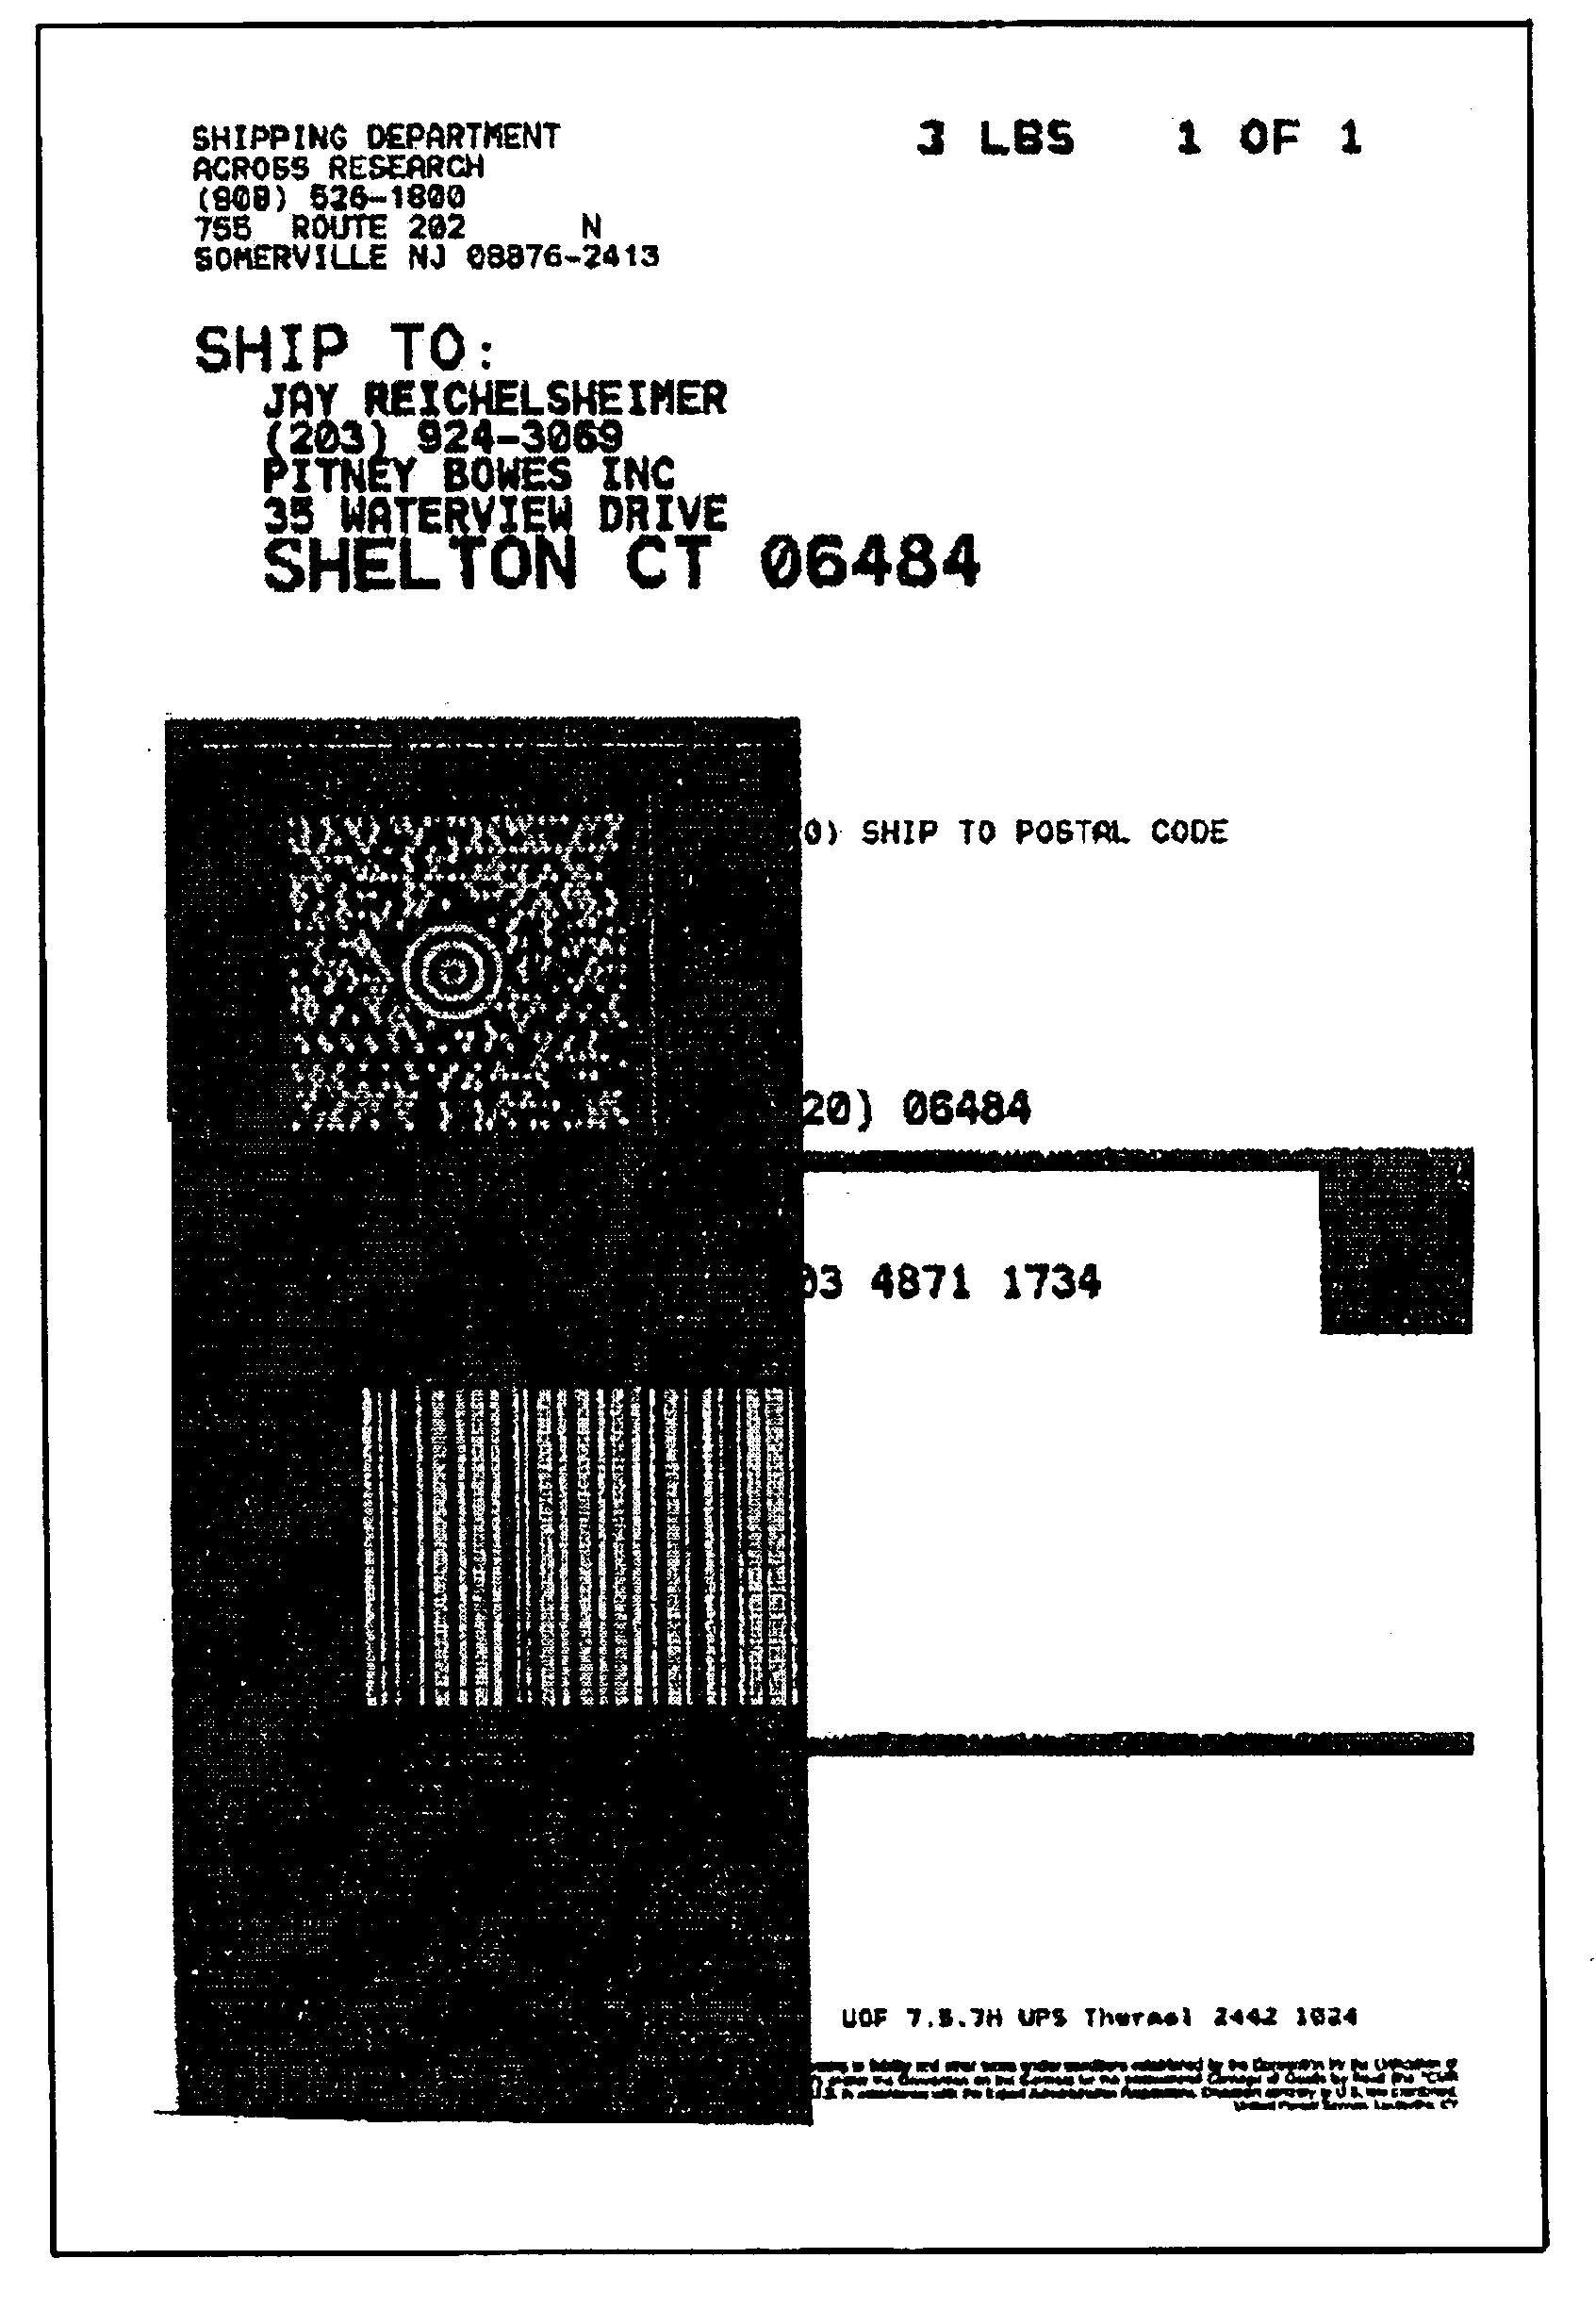 Method for printing high information density machine-readable composite images